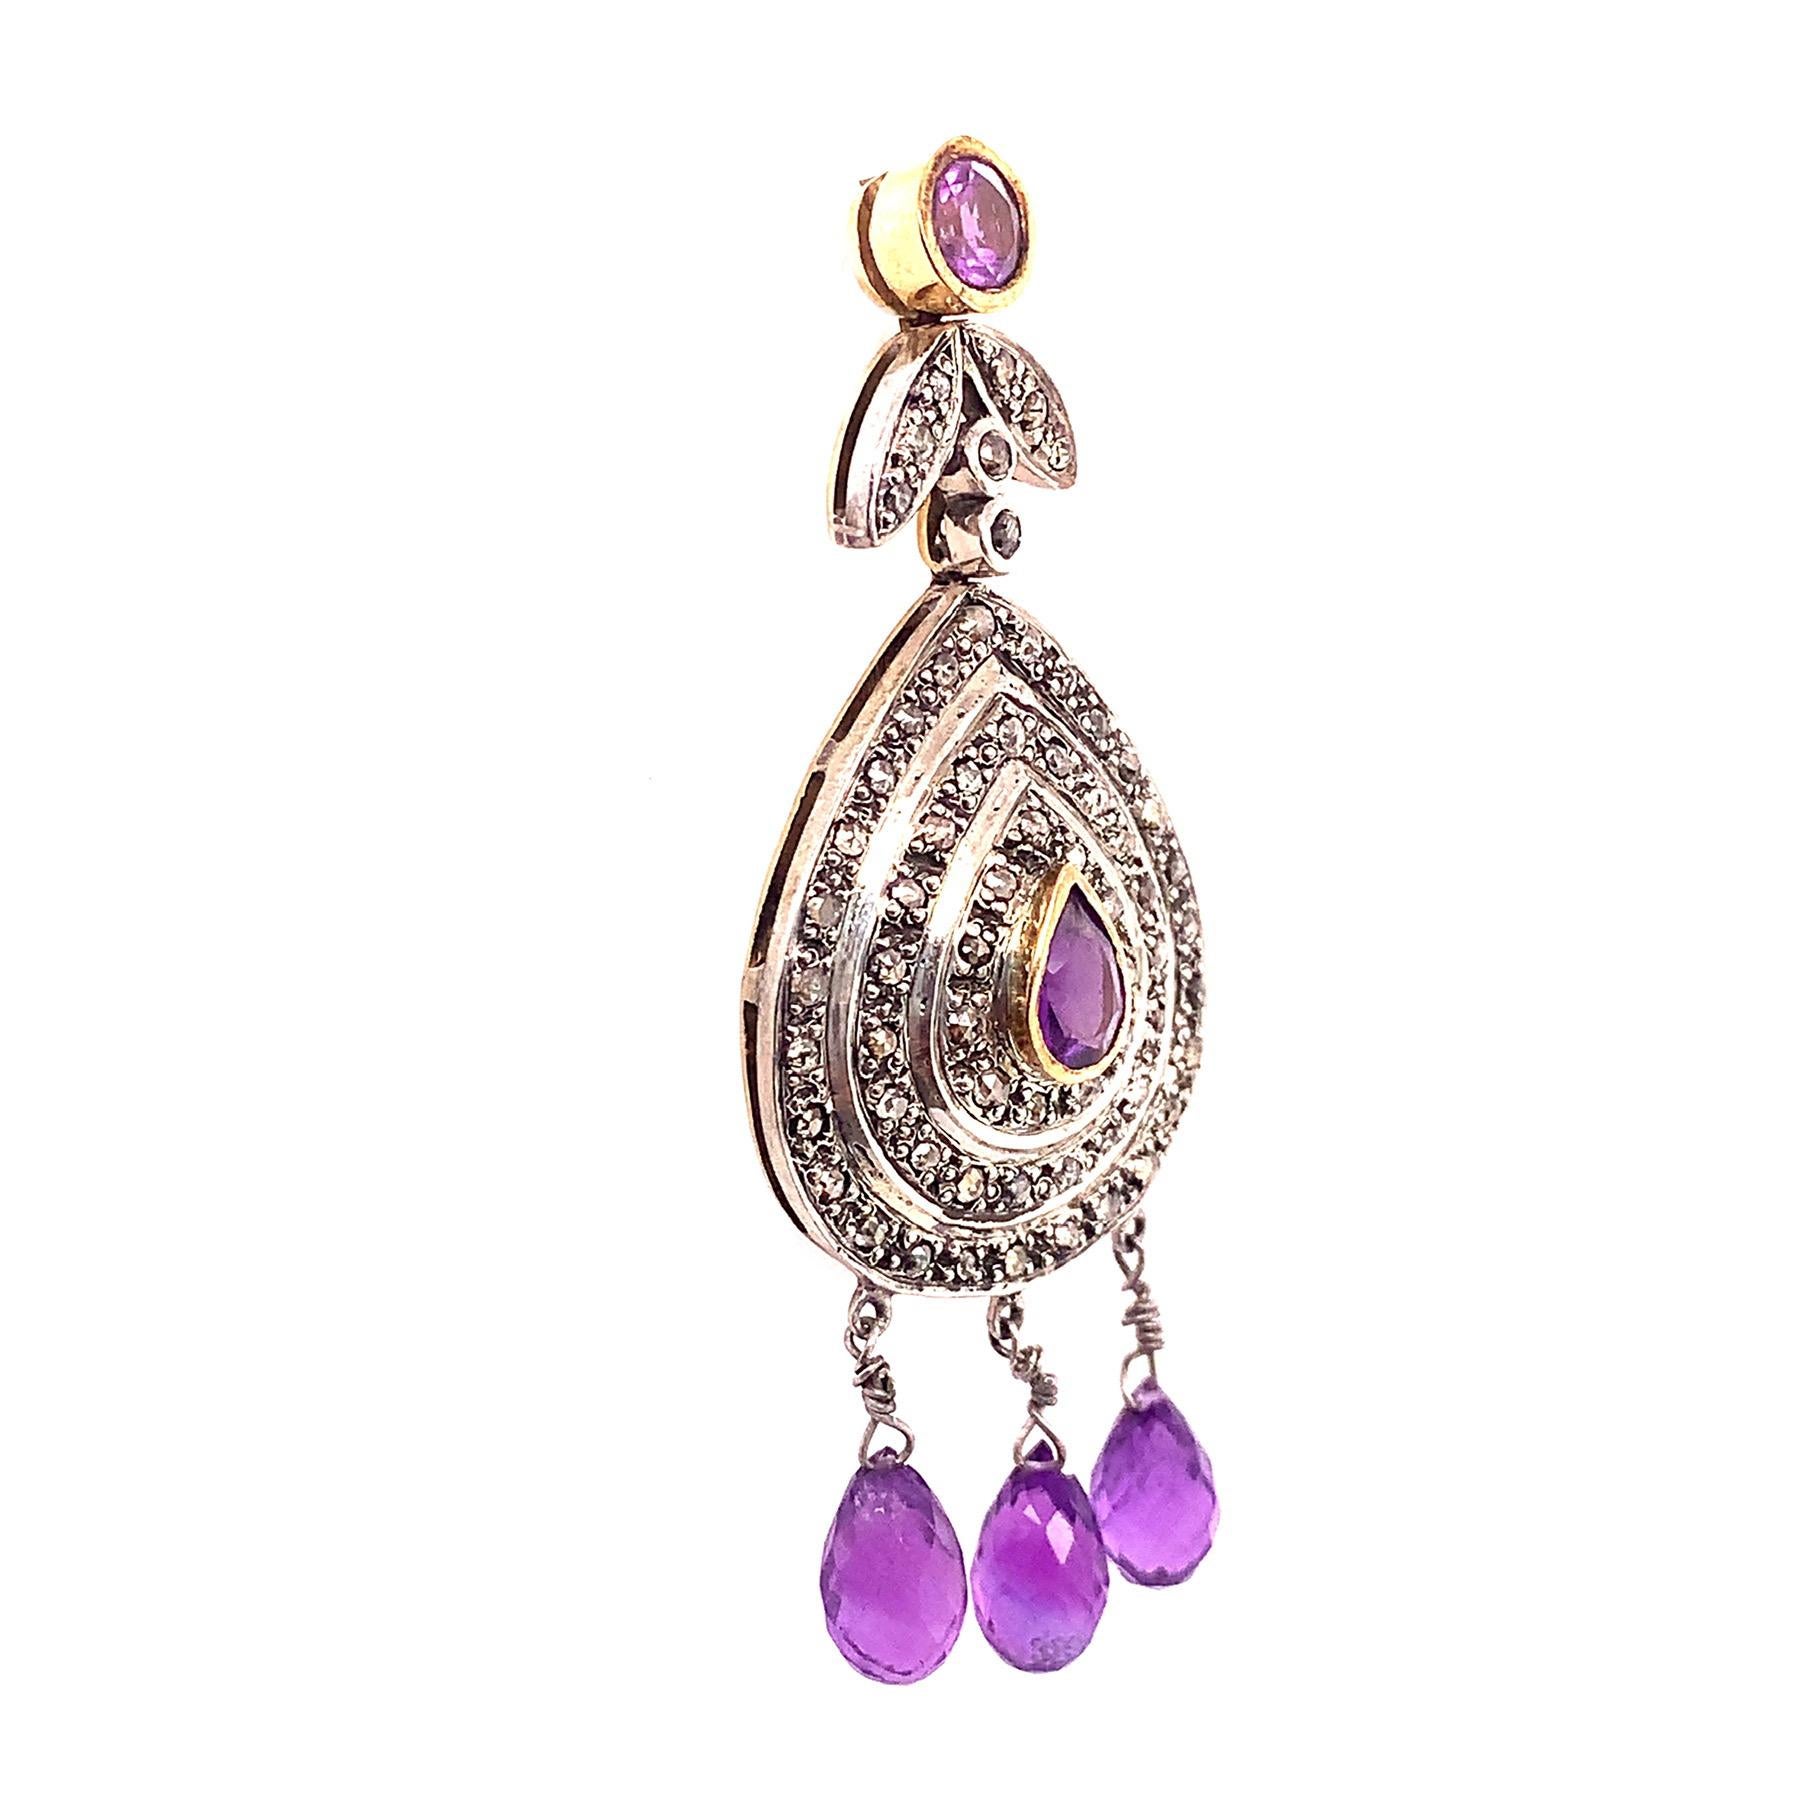 Contemporary Lucea New York Amethyst and Rustic Diamonds Pendant For Sale